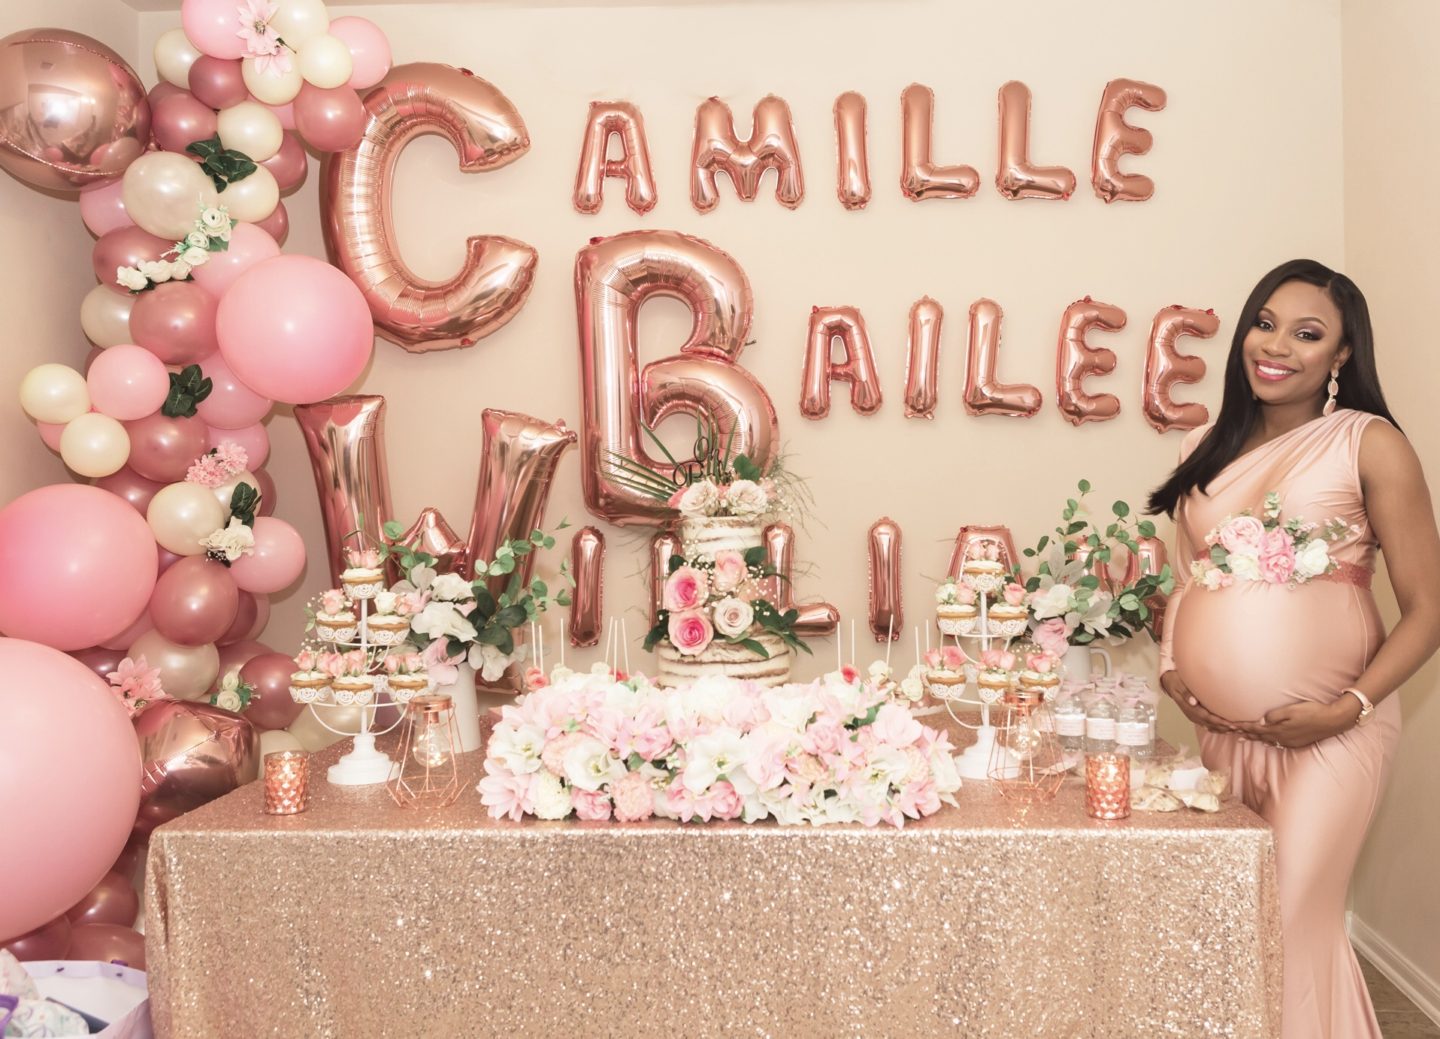 Baby Camille’s Sprinkle Deets!